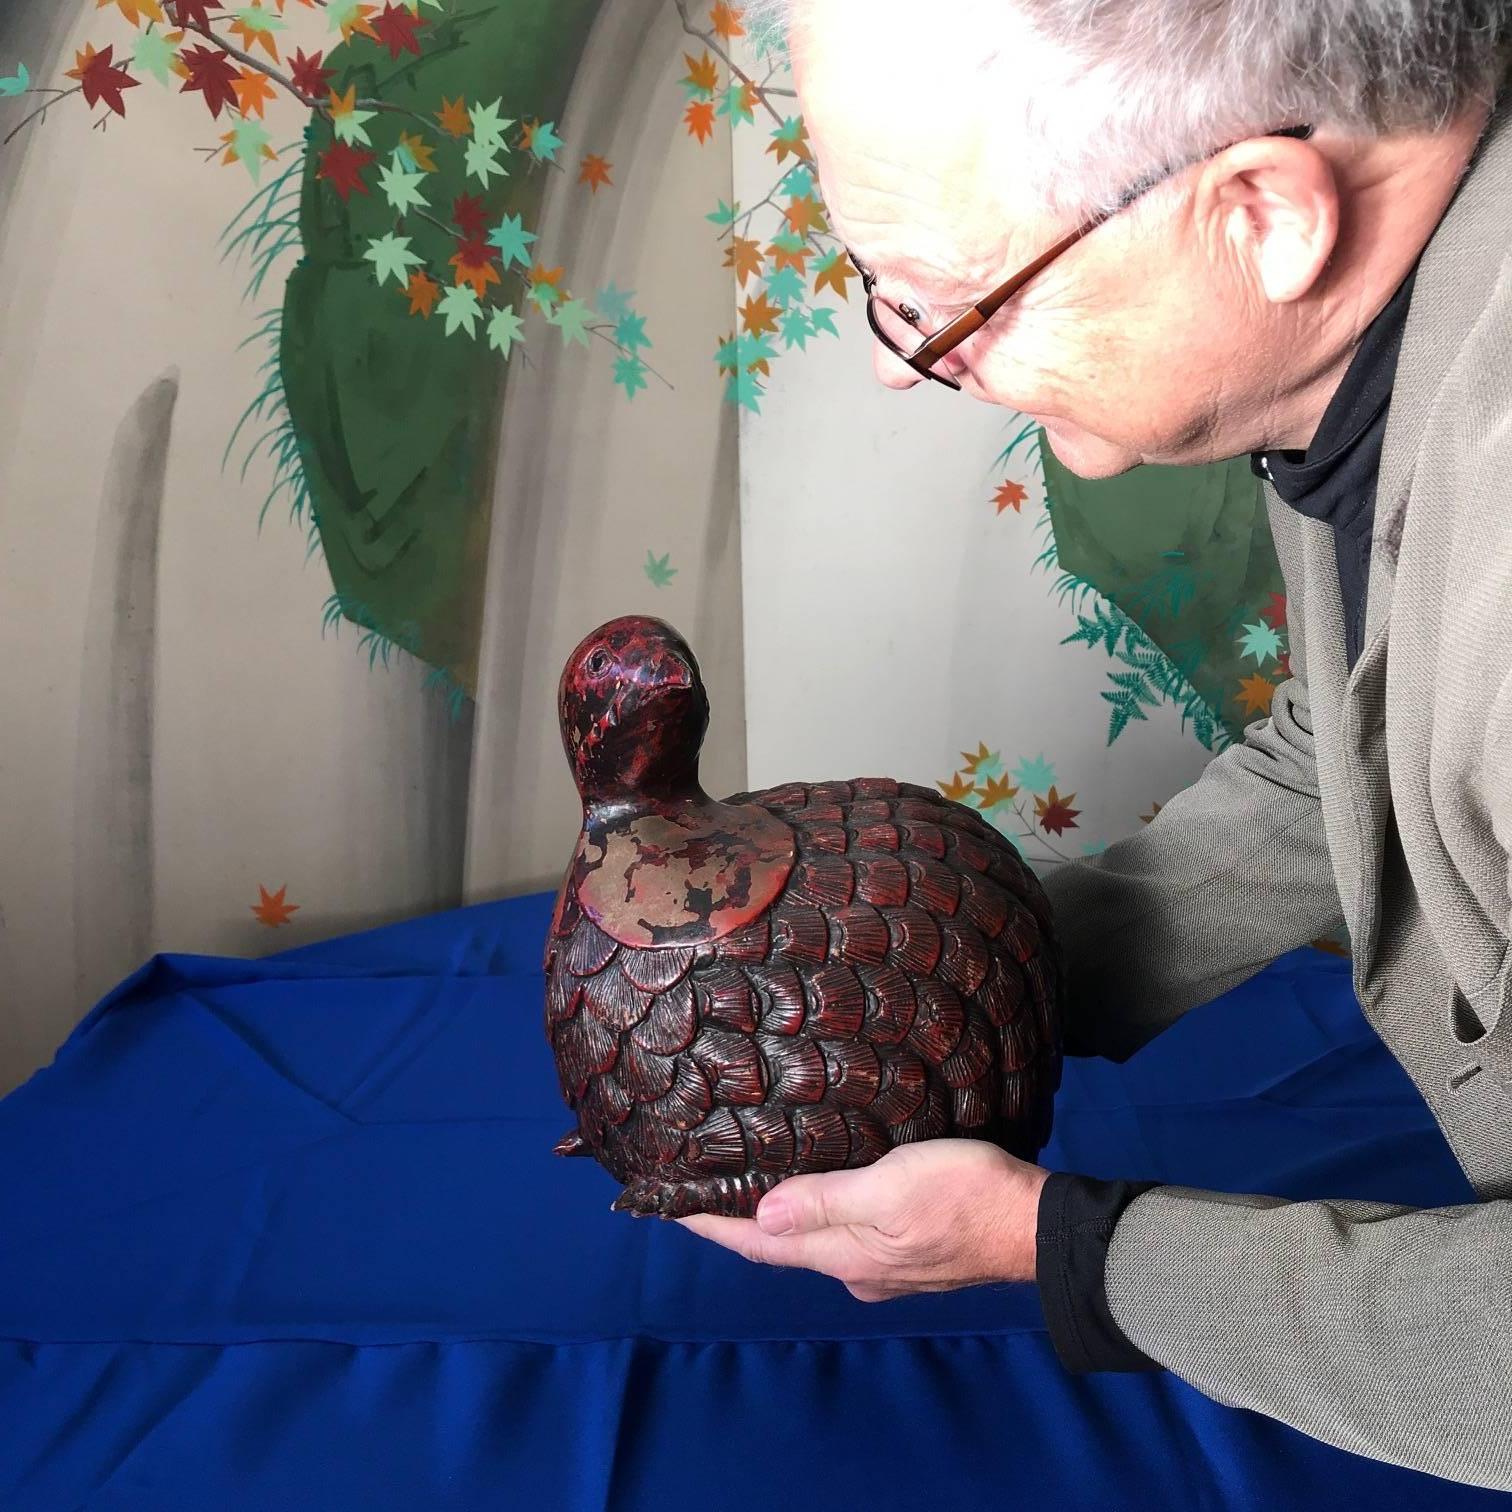 NOW SAVE 20% OR MORE

Japan, a fine large antique quail sculpture hand-carved and red lacquered, Taisho period and 100 years old, signed.

Fine old carving with traces of red lacquer and remnant old seal mark on base. 

Carved from one block of wood